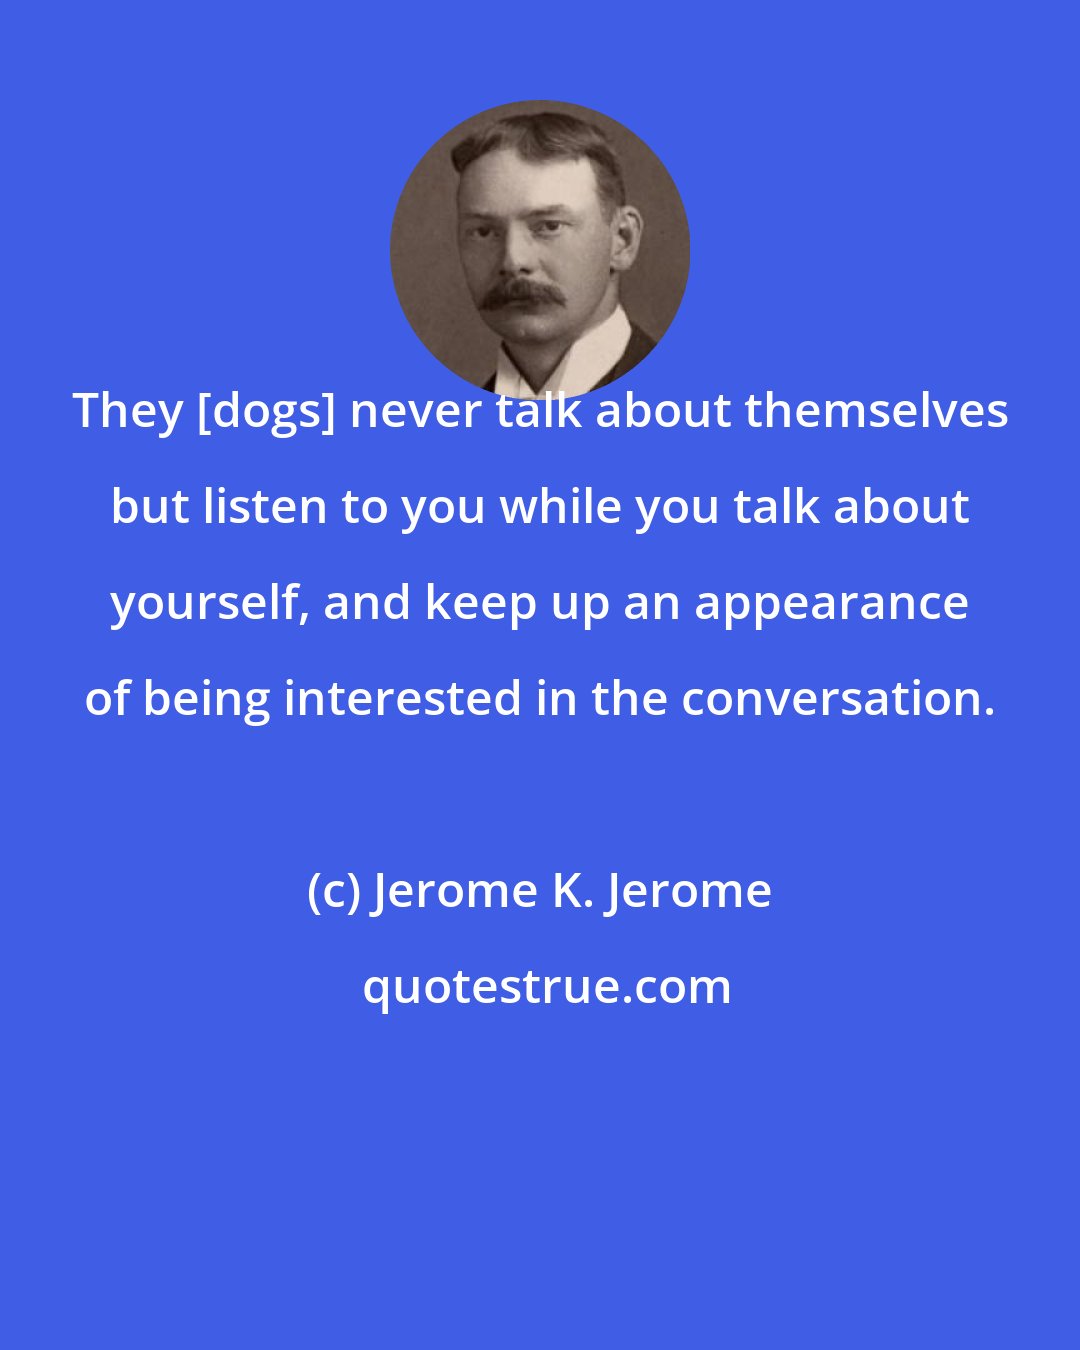 Jerome K. Jerome: They [dogs] never talk about themselves but listen to you while you talk about yourself, and keep up an appearance of being interested in the conversation.